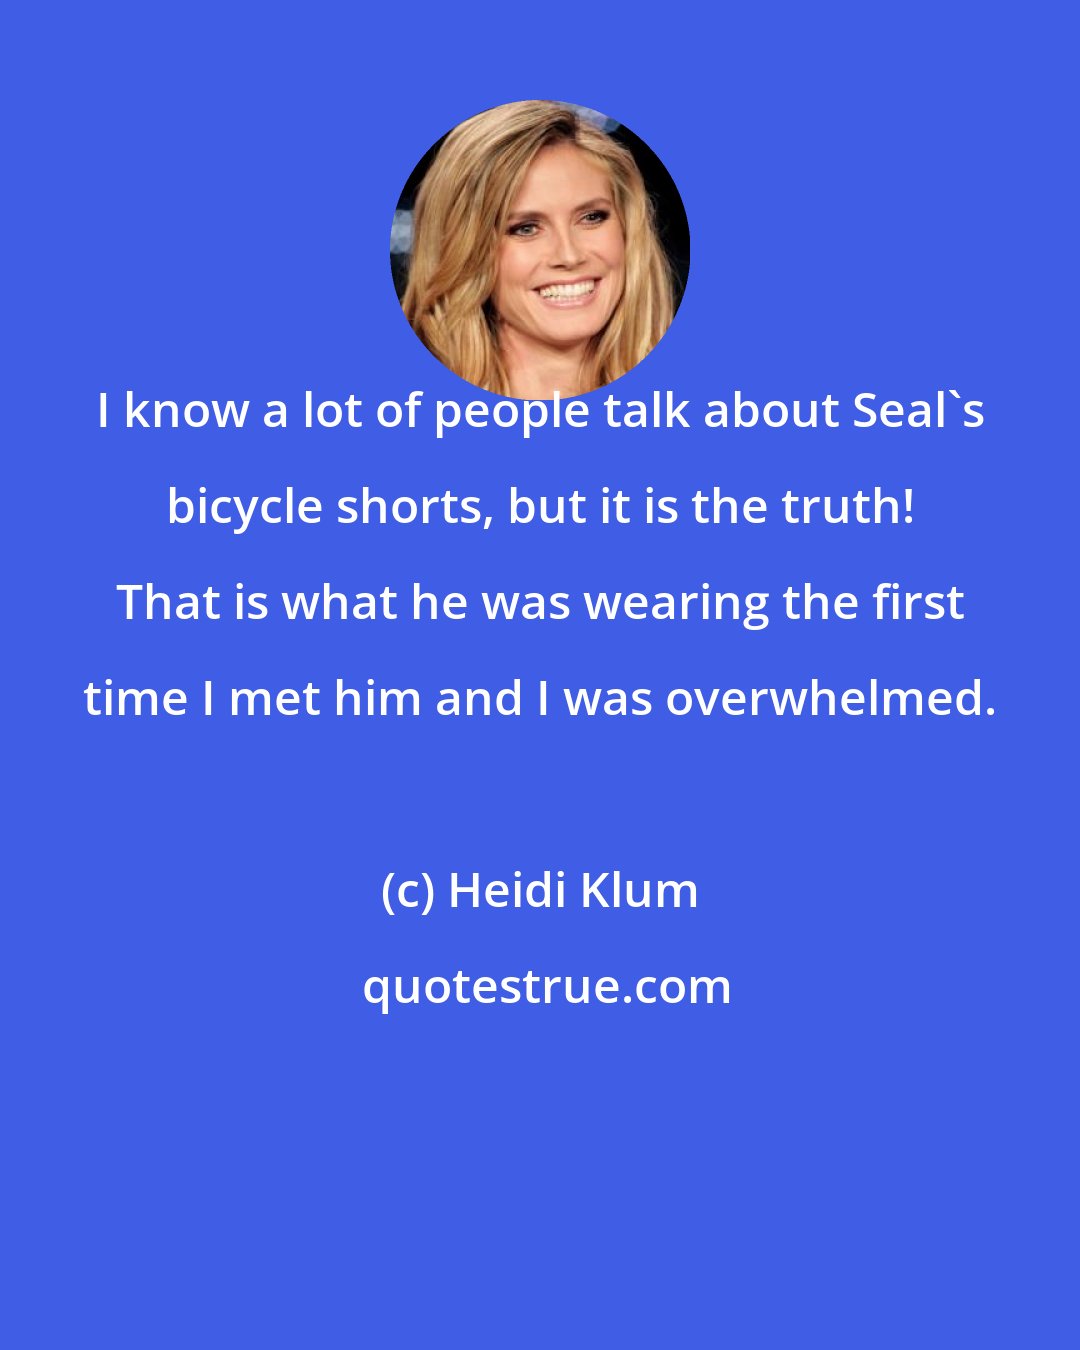 Heidi Klum: I know a lot of people talk about Seal's bicycle shorts, but it is the truth! That is what he was wearing the first time I met him and I was overwhelmed.